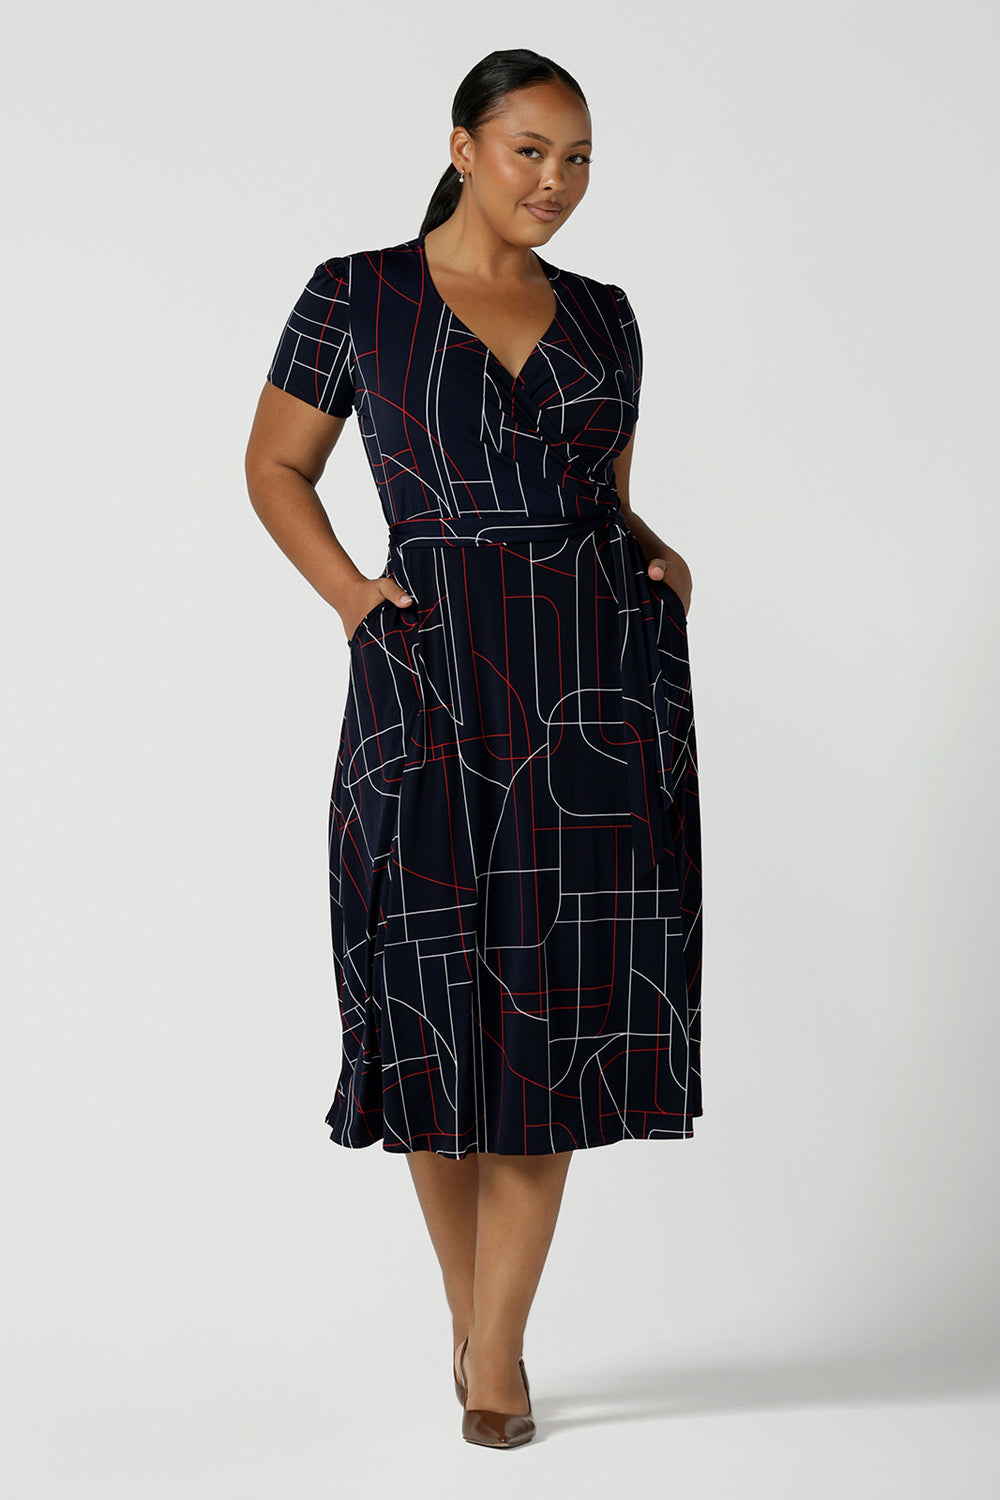 Alexis Dress in Navy Abstract